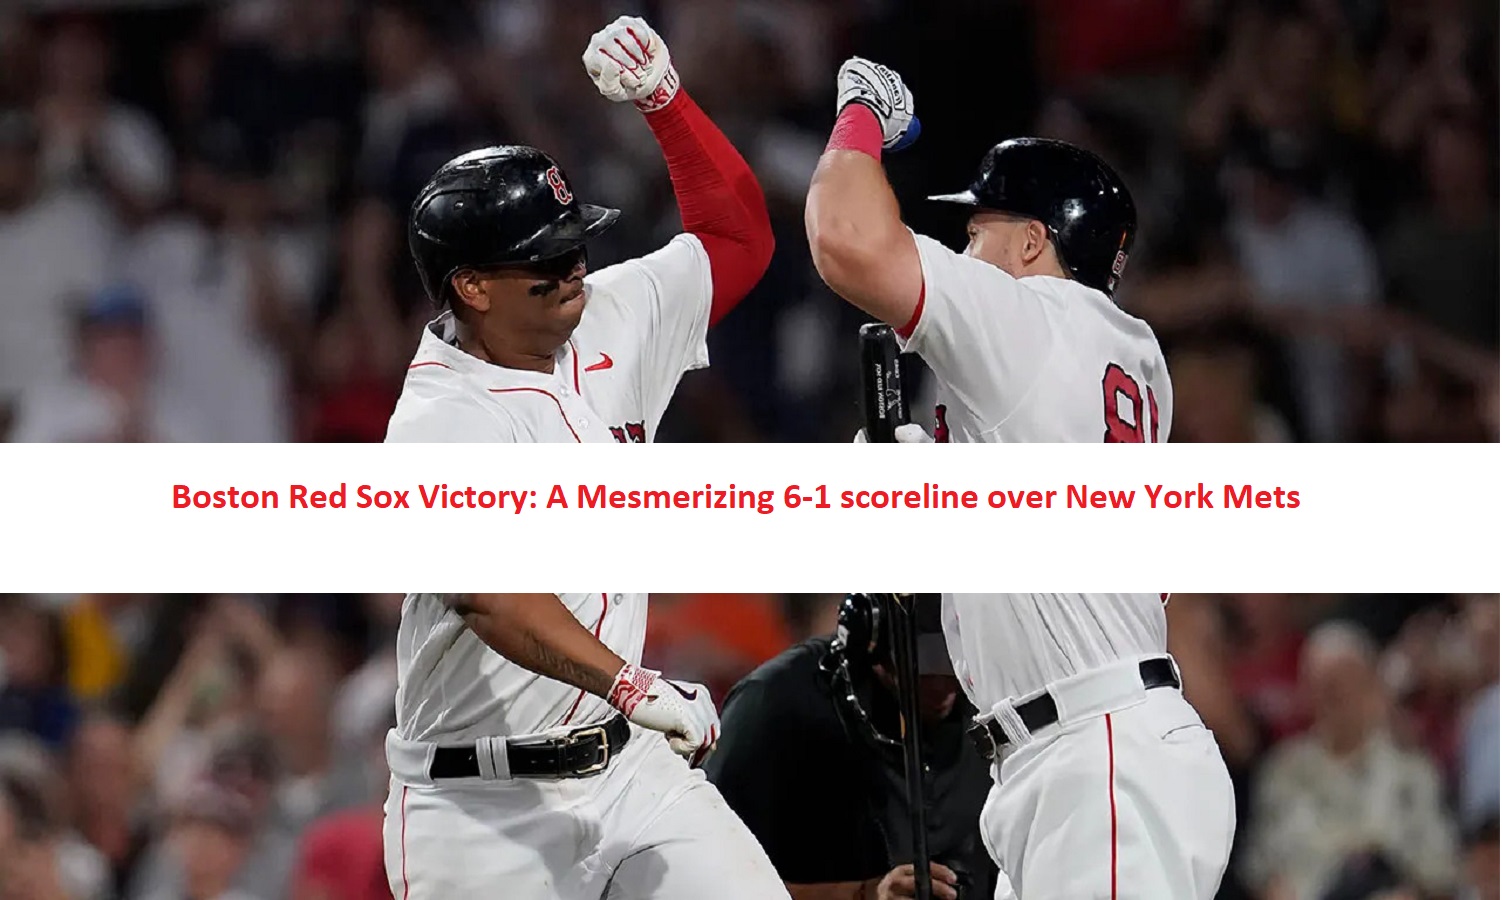 Boston Red Sox Victory: A Mesmerizing 6-1 scoreline over New York Mets